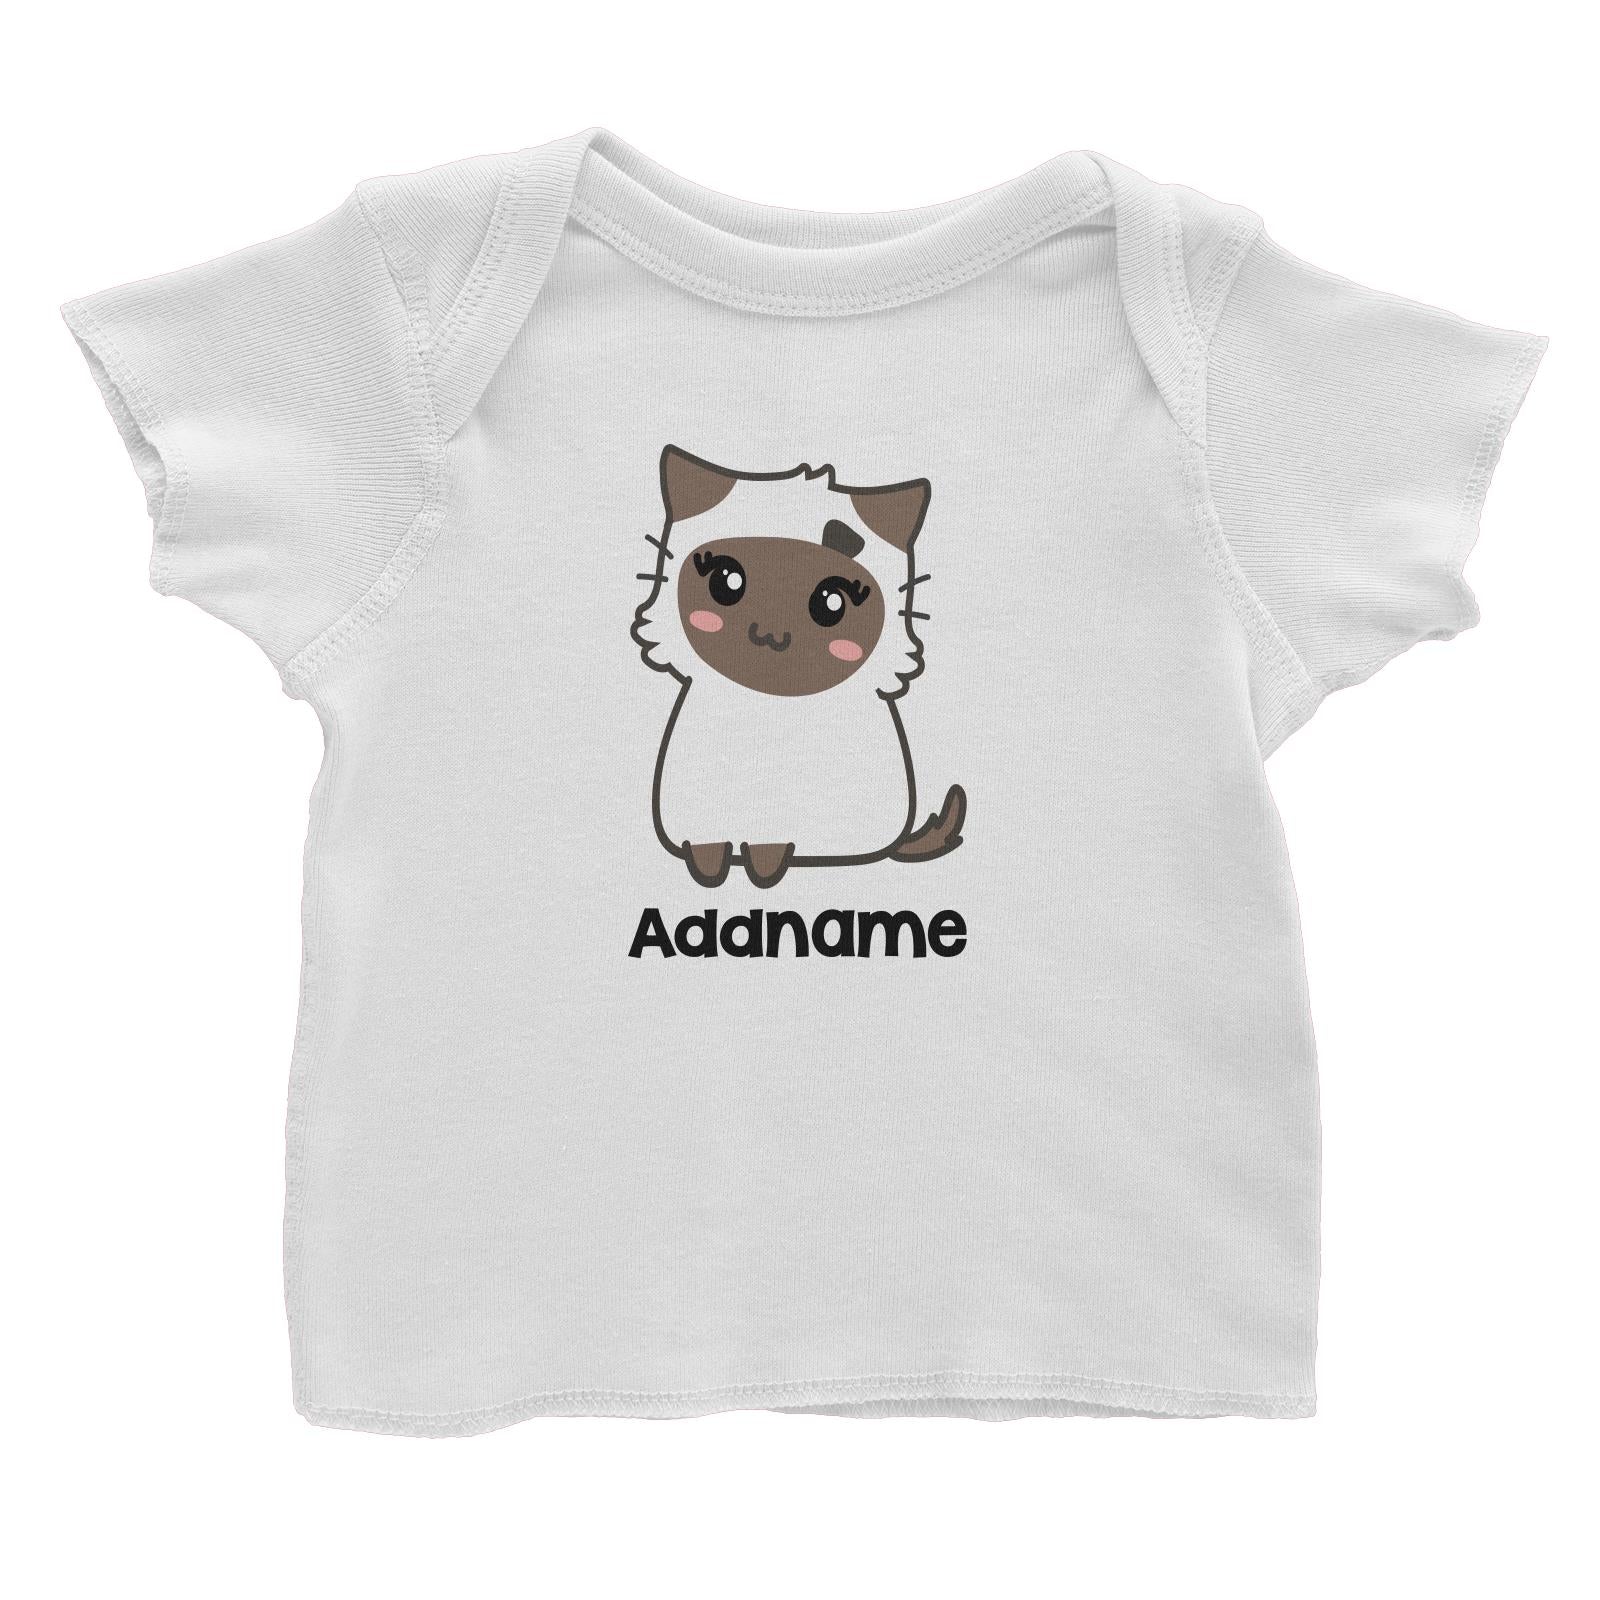 Drawn Adorable Cats White & Chocolate Addname Baby T-Shirt